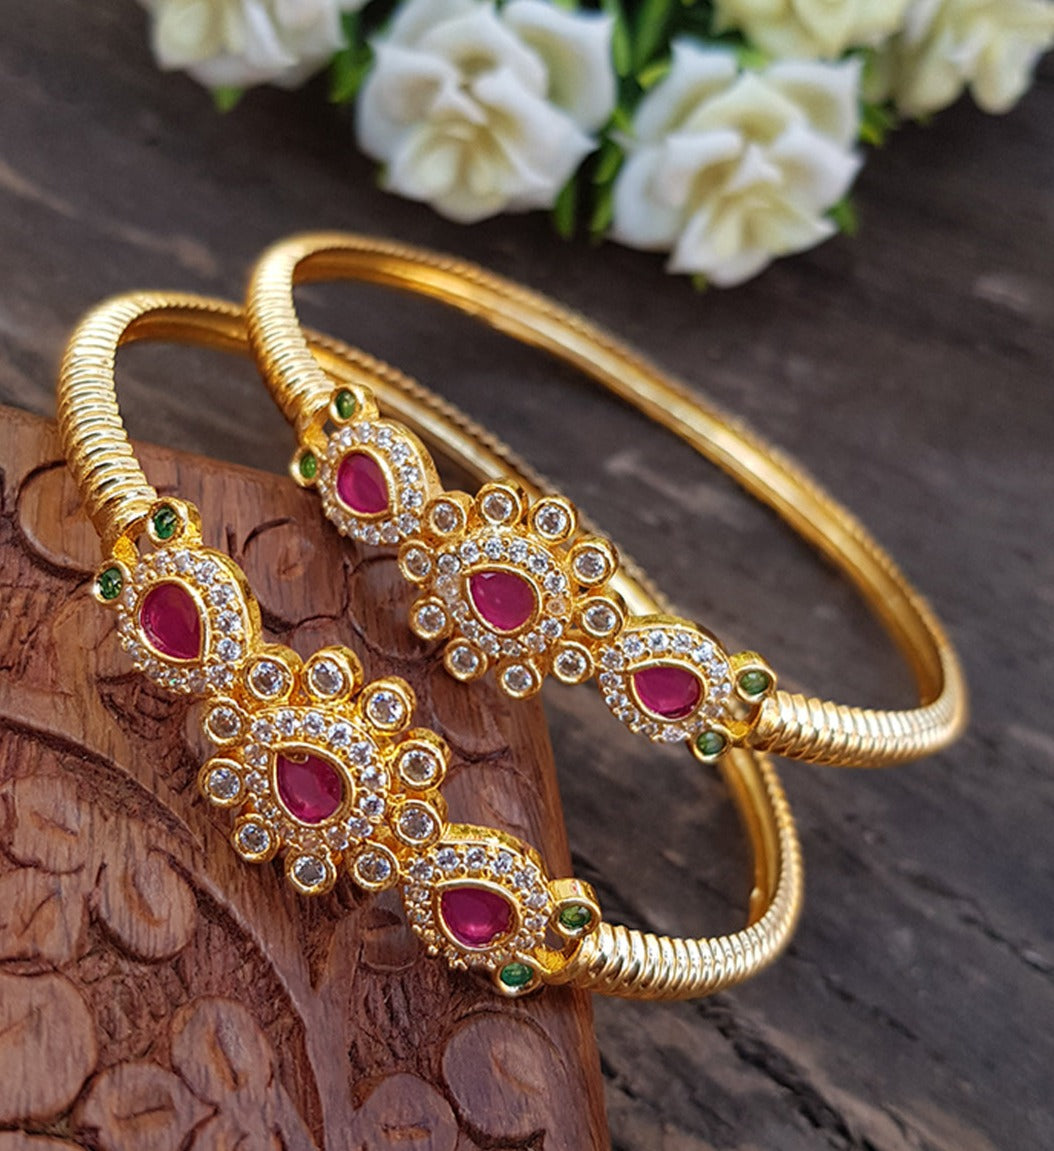 Premium Micro Gold Plated Set of 2 Temple Bangles 9226A